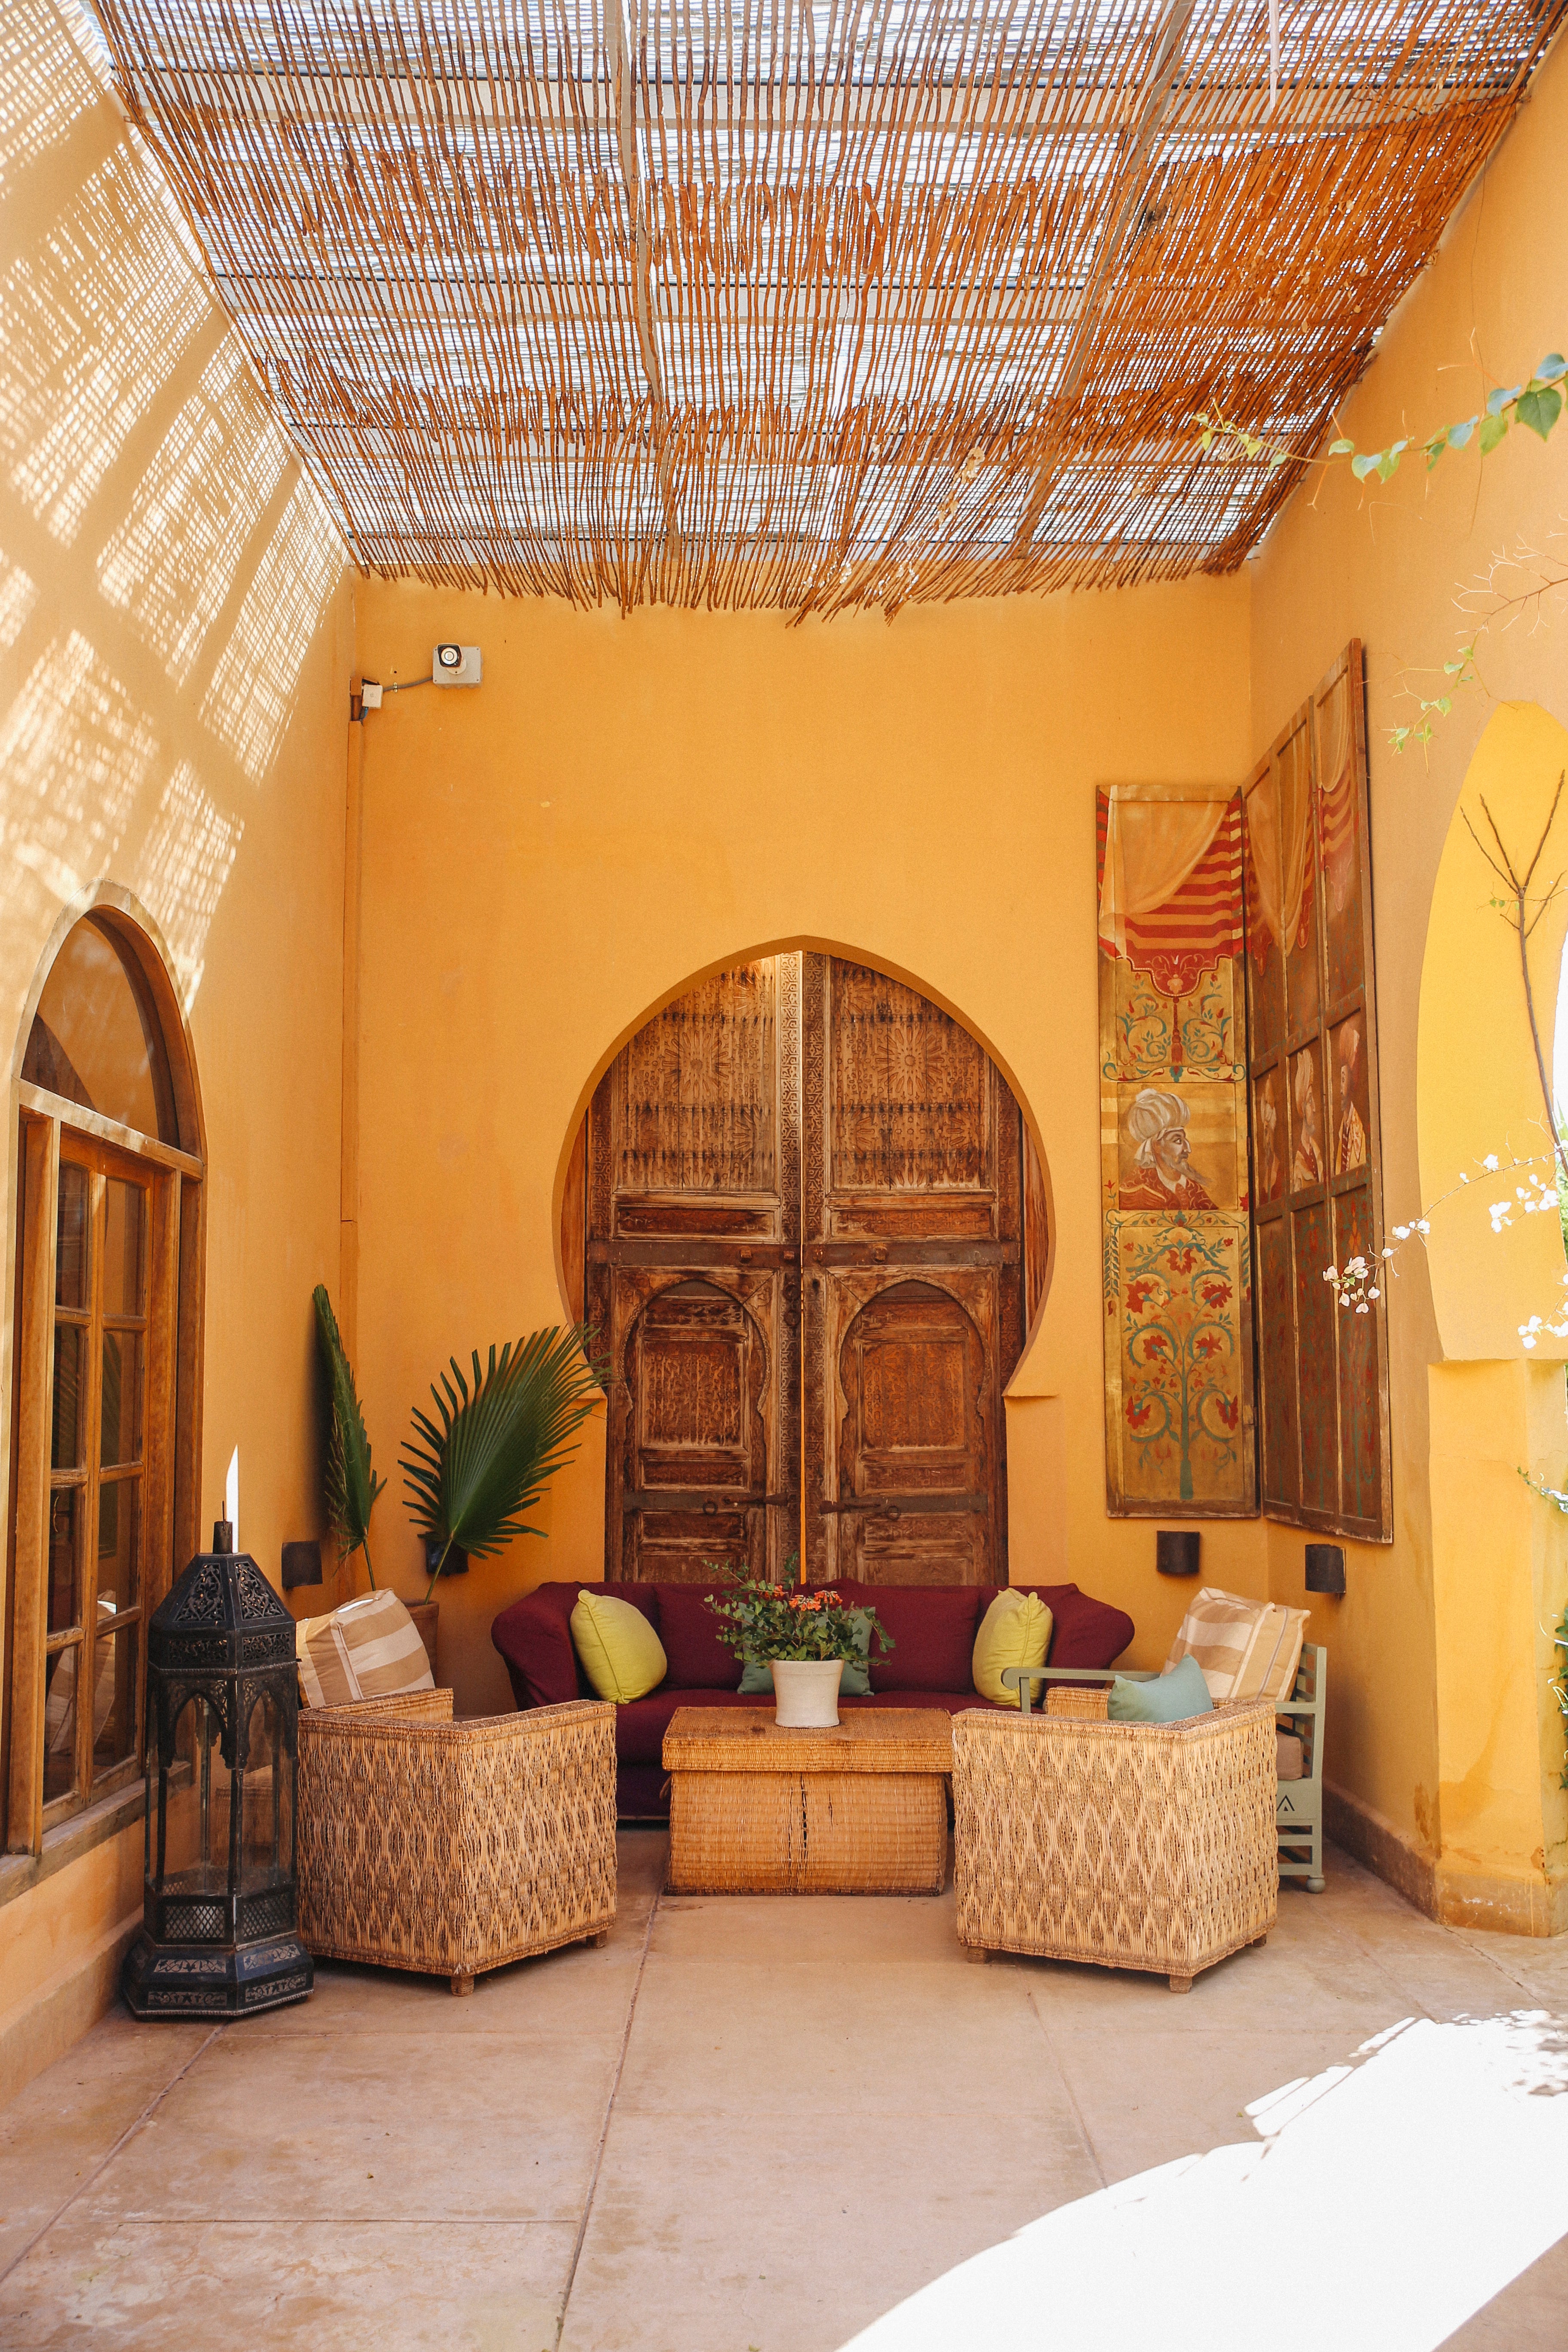 Beautiful Photos Of Jnane Tamsna, The Only Boutique Hotel In Morocco Owned and Operated By A Black Woman